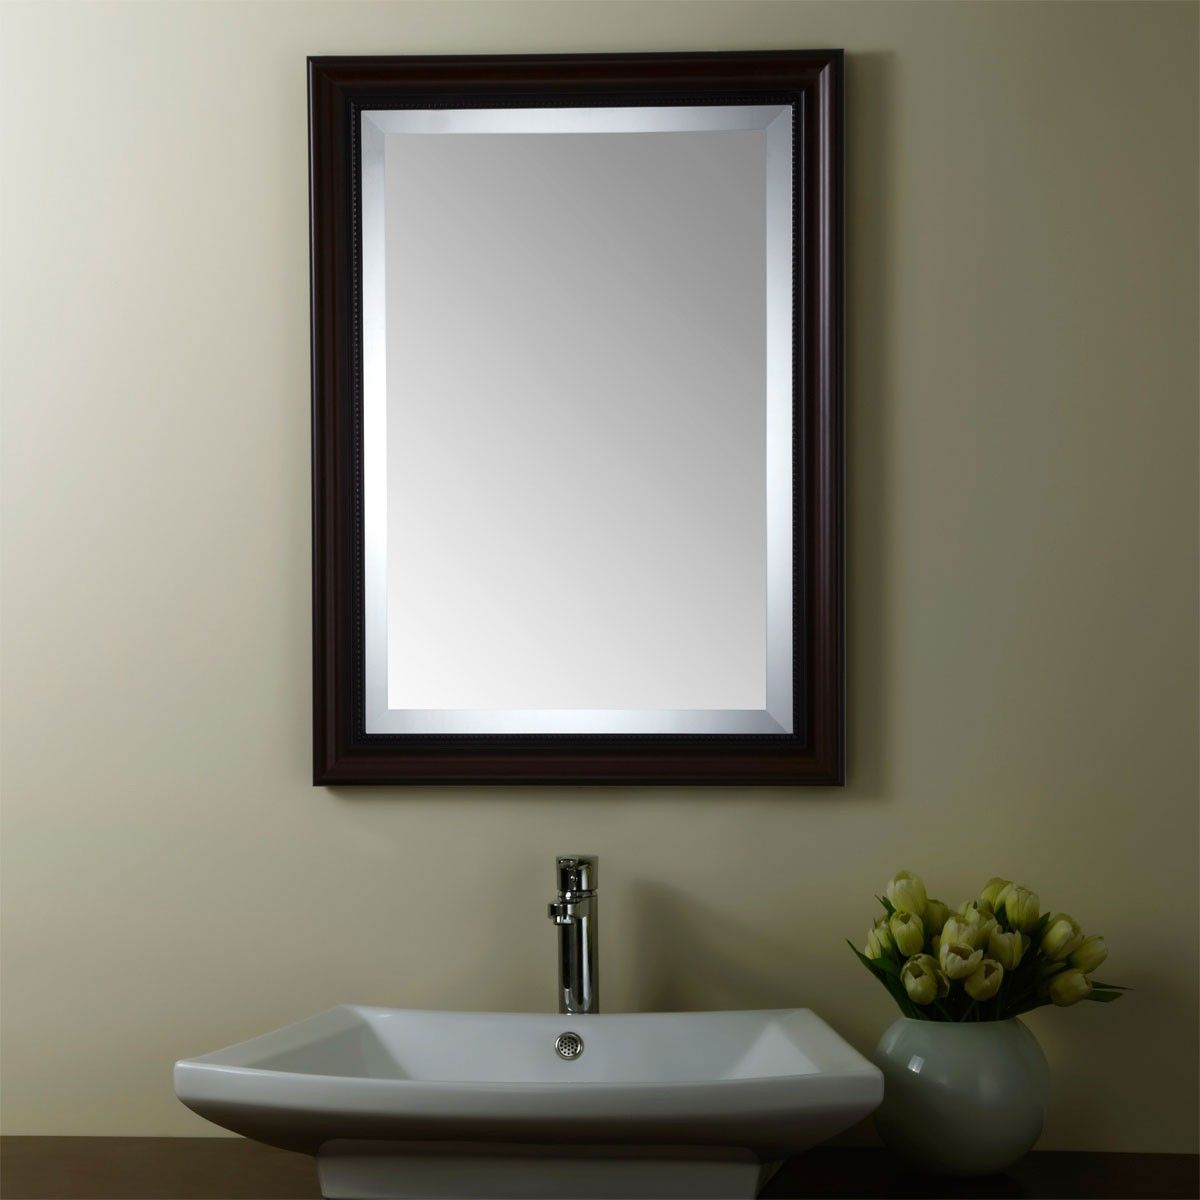 Reversible Antique Wall Mirror/24 Inch x 32 Inch (YJ-650H)